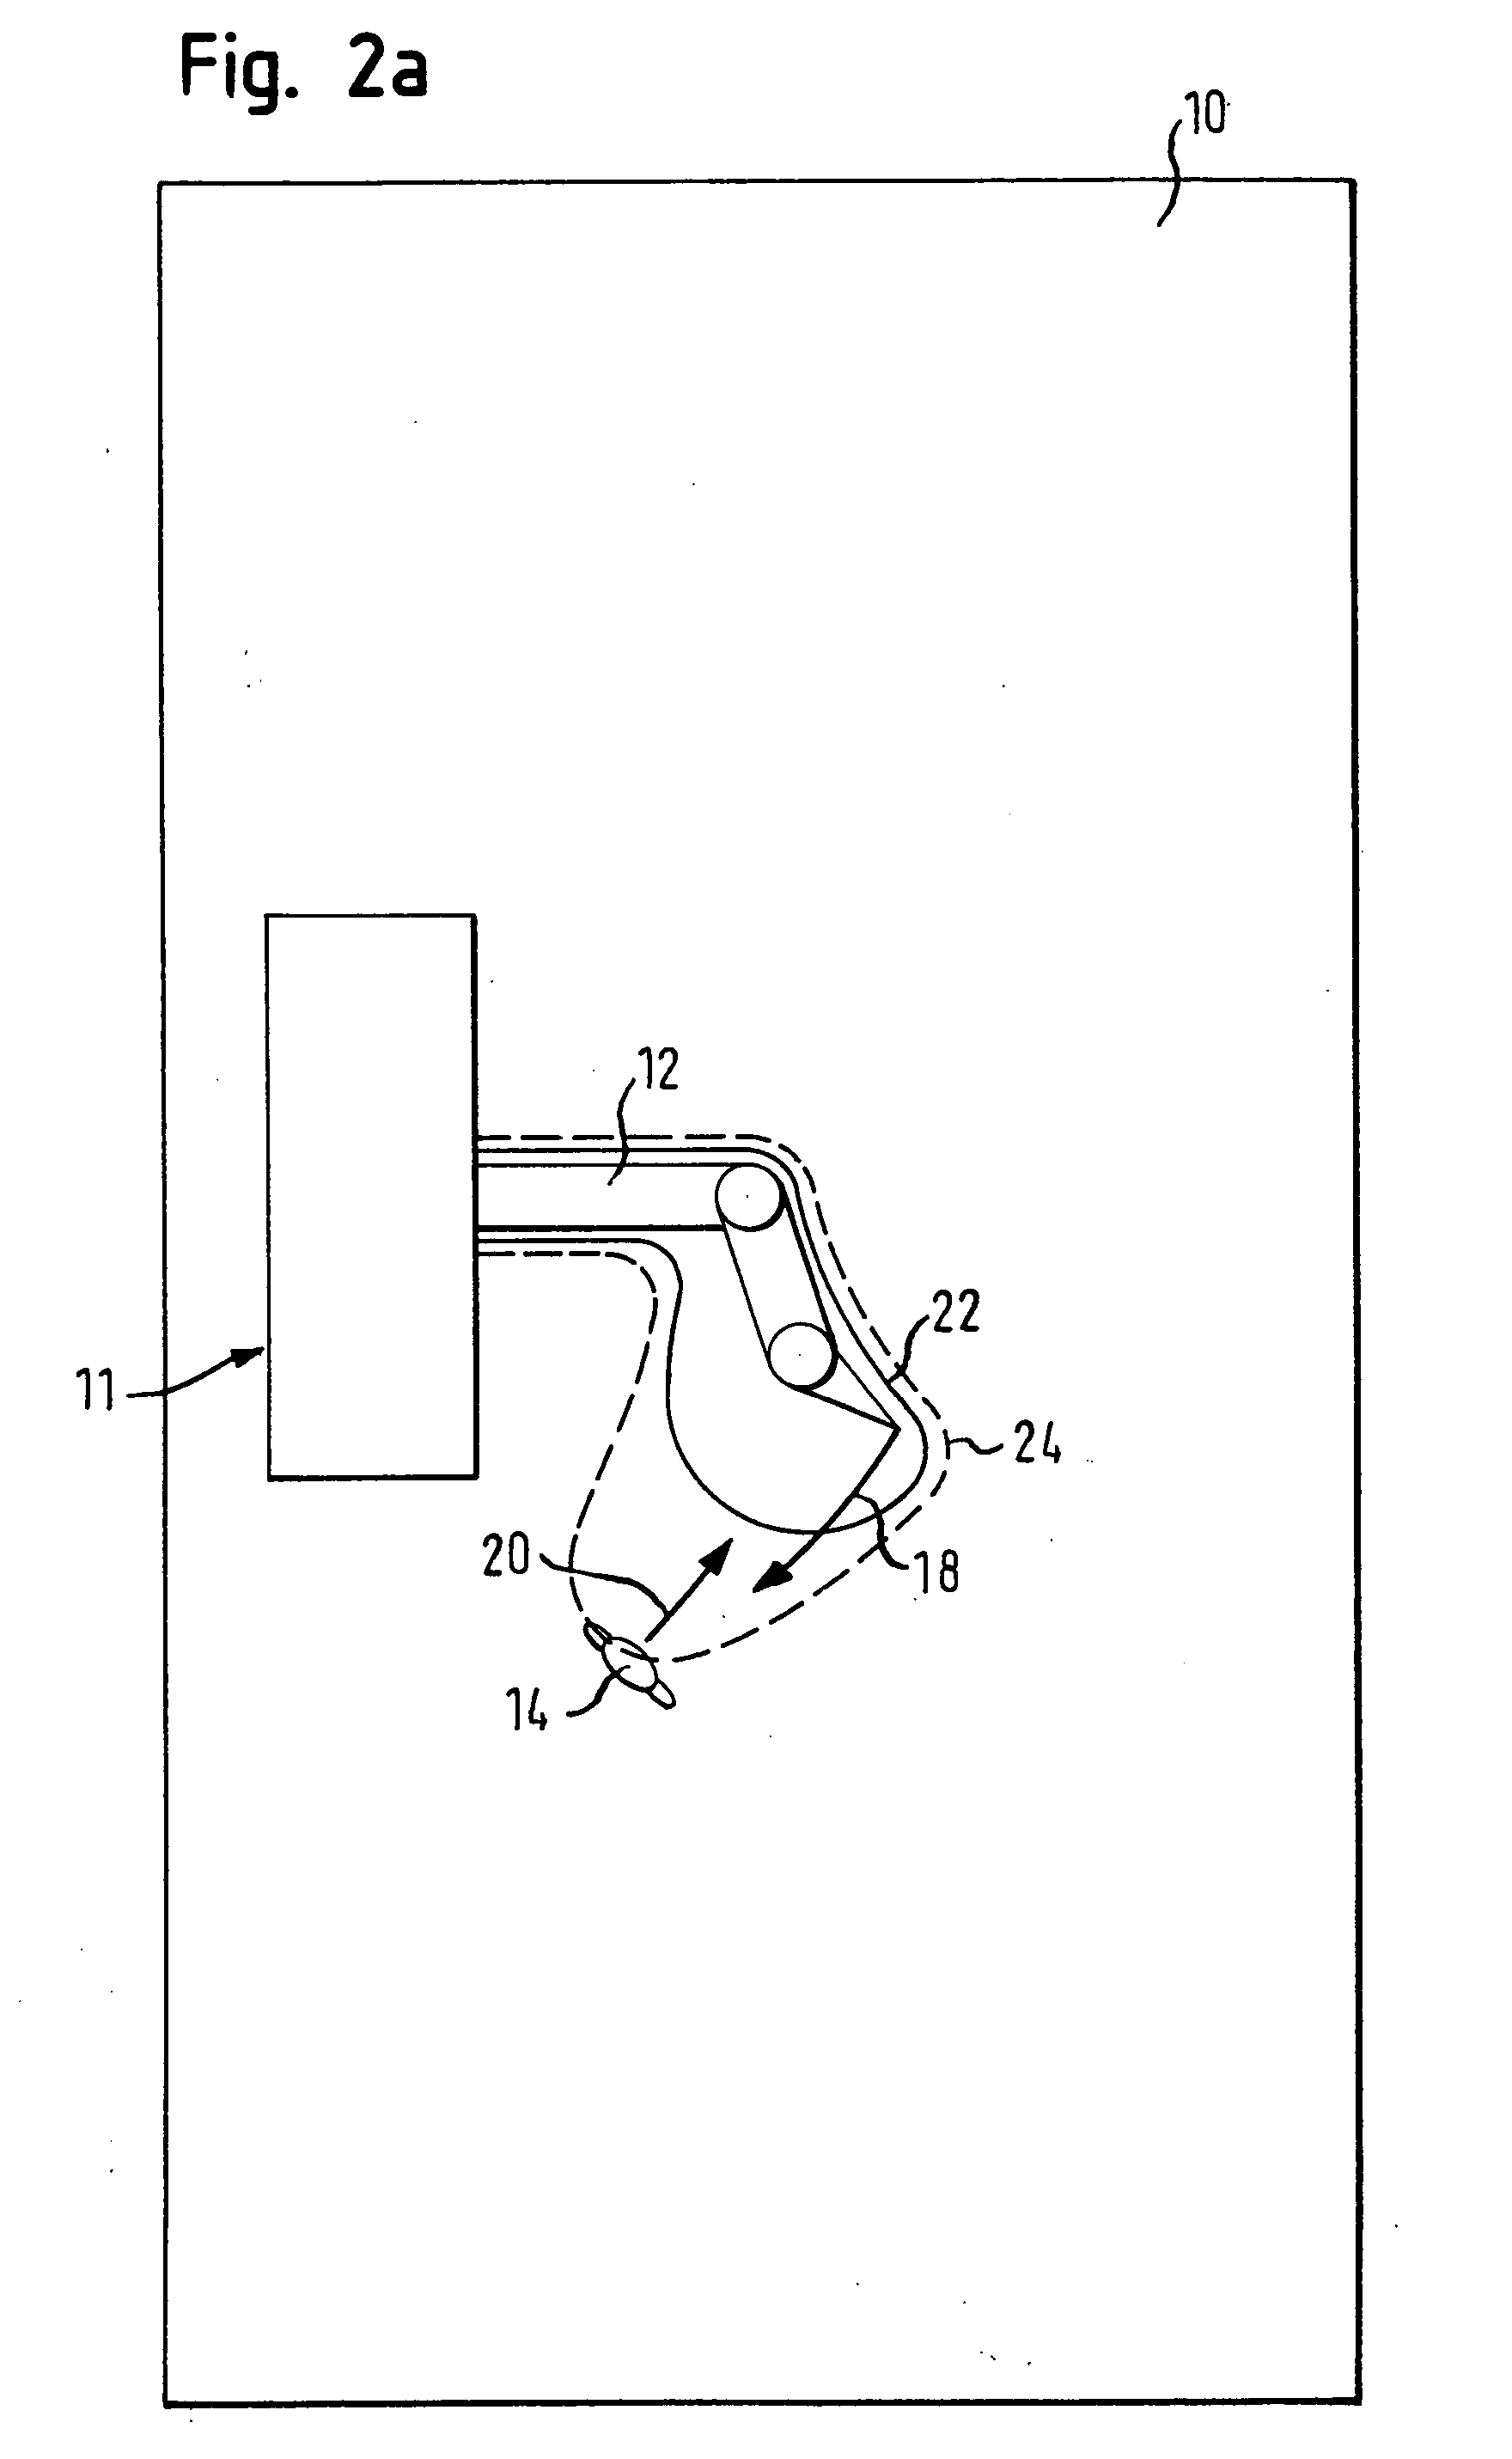 Method and apparatus for the control of a safety-relevant function of a machine